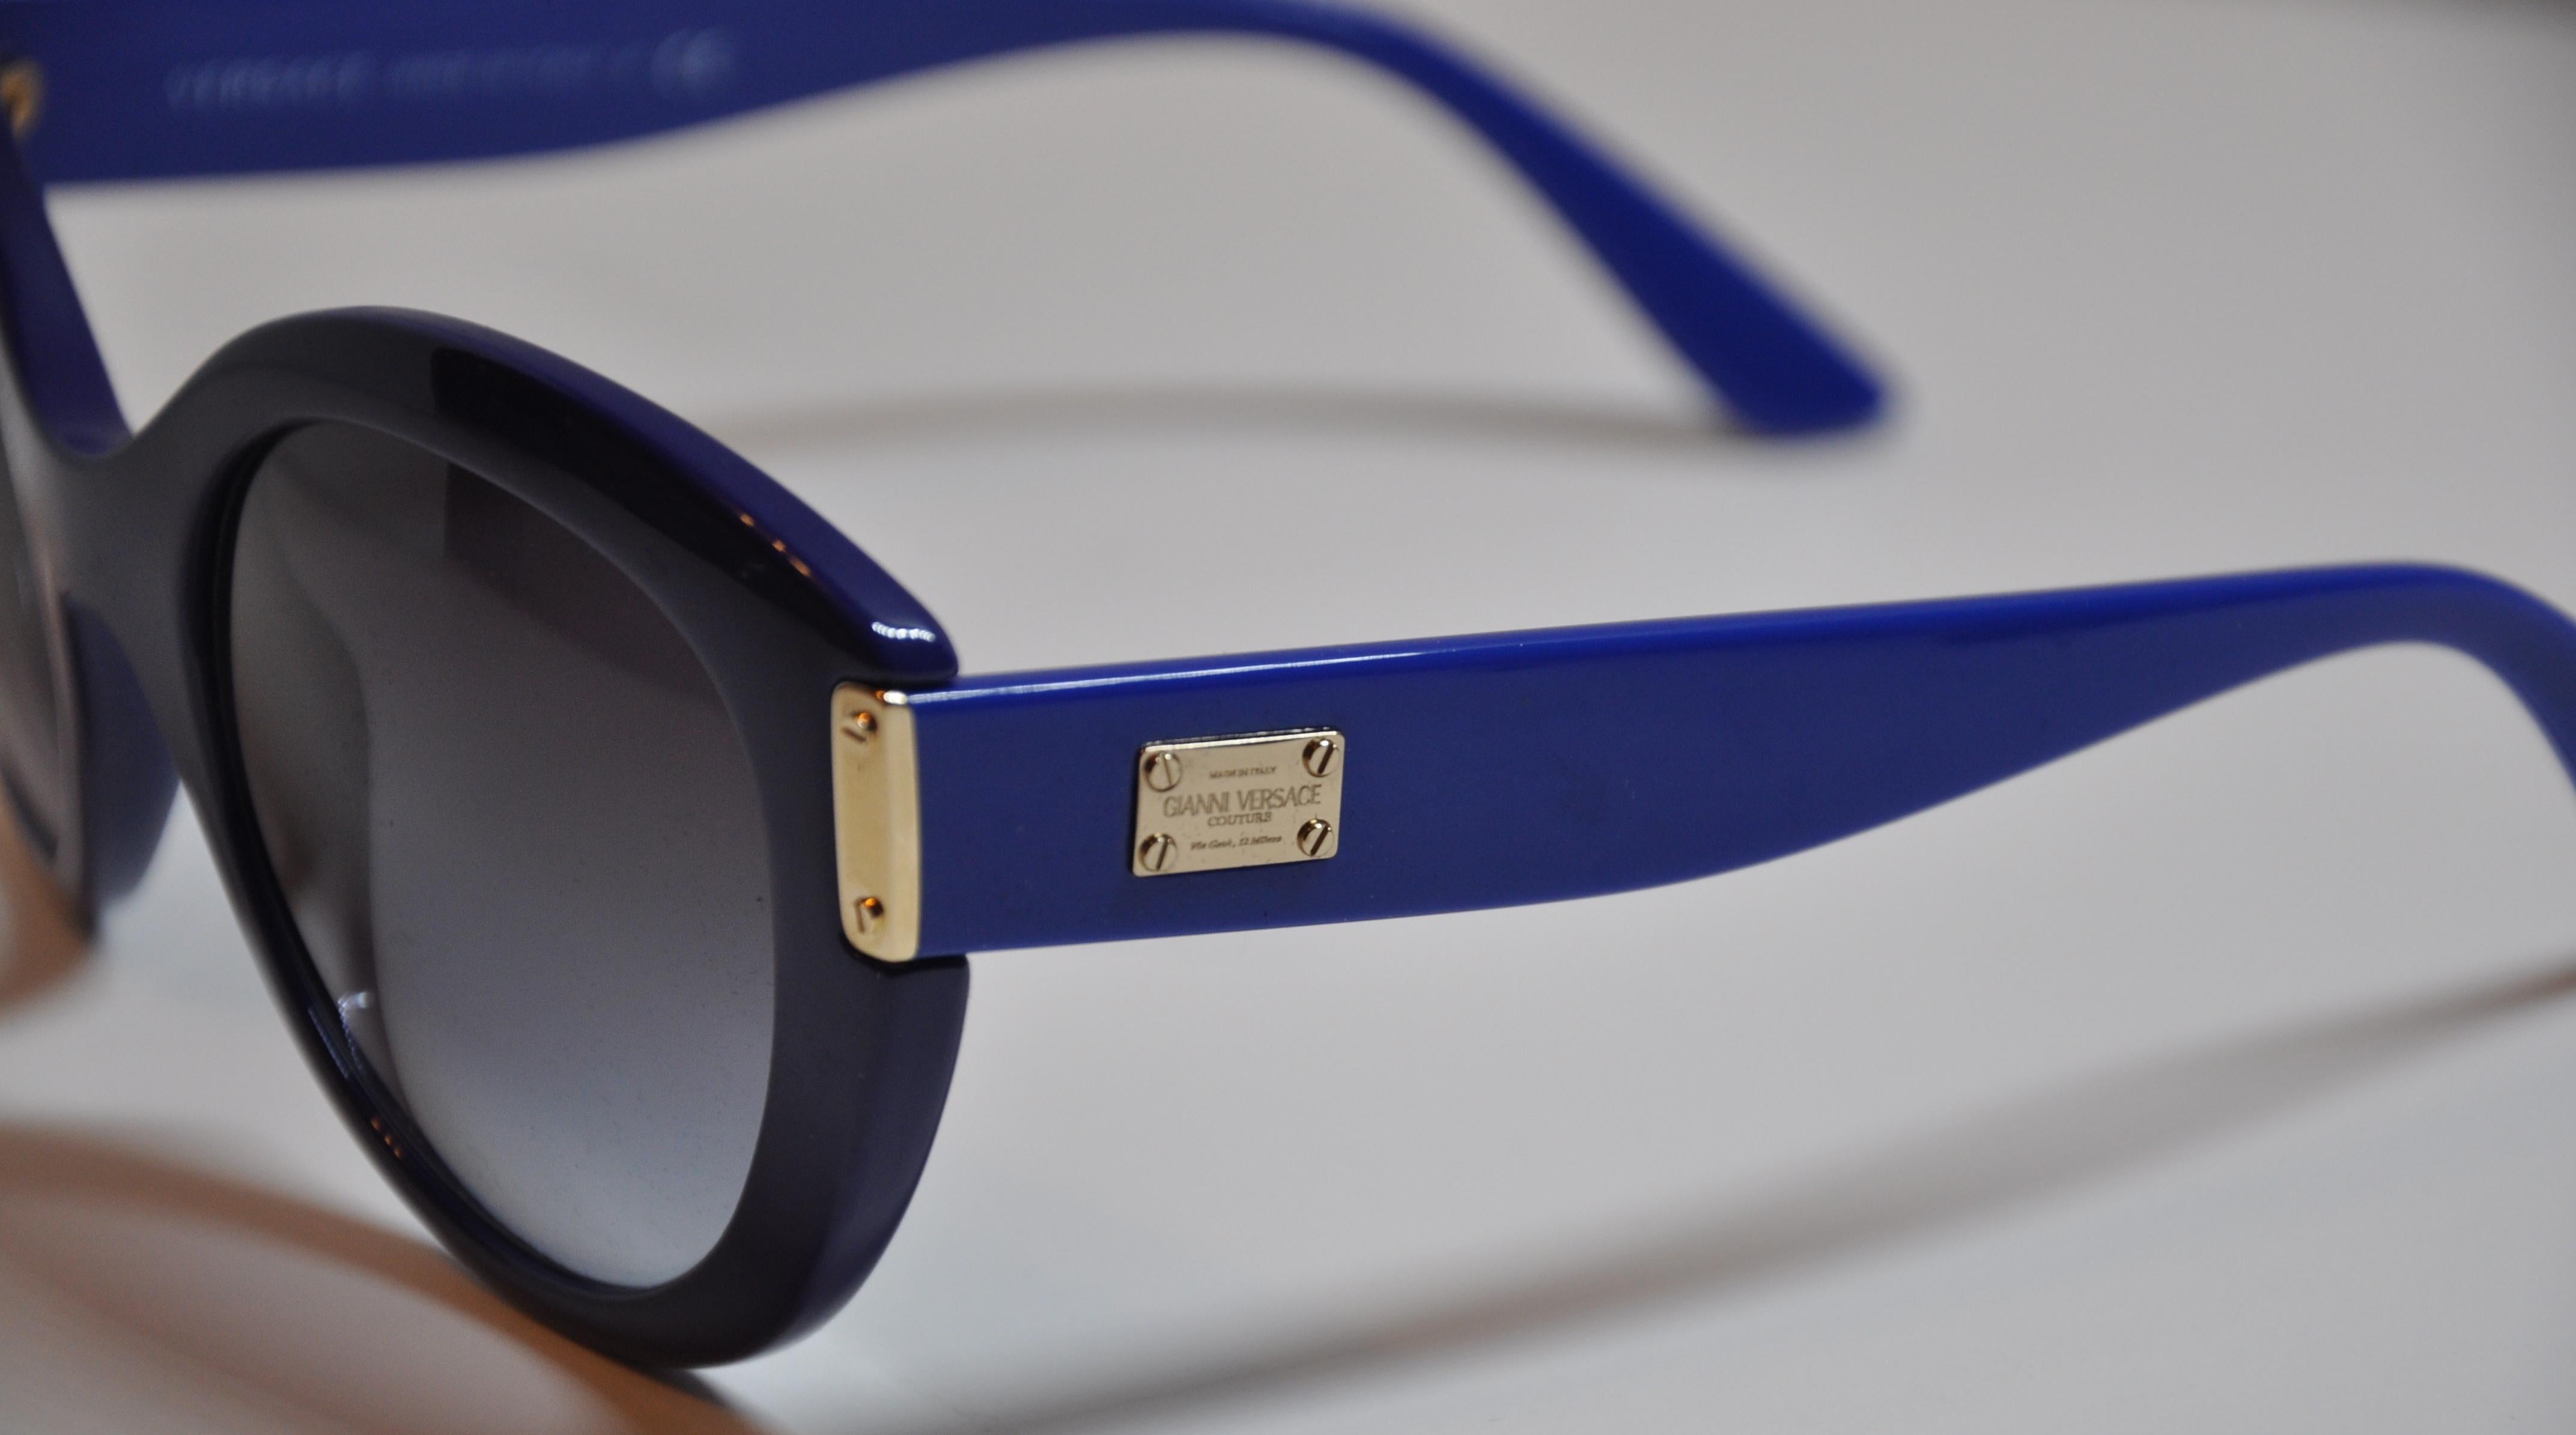        Gianni Versace wonderfully wicked thick bold Lapis-shade sunglasses accented with gilded gold hardware and studs. The arms are detailed with the signature name etched into the gilded gold hardware plate. The front measures 5 7/8 inches